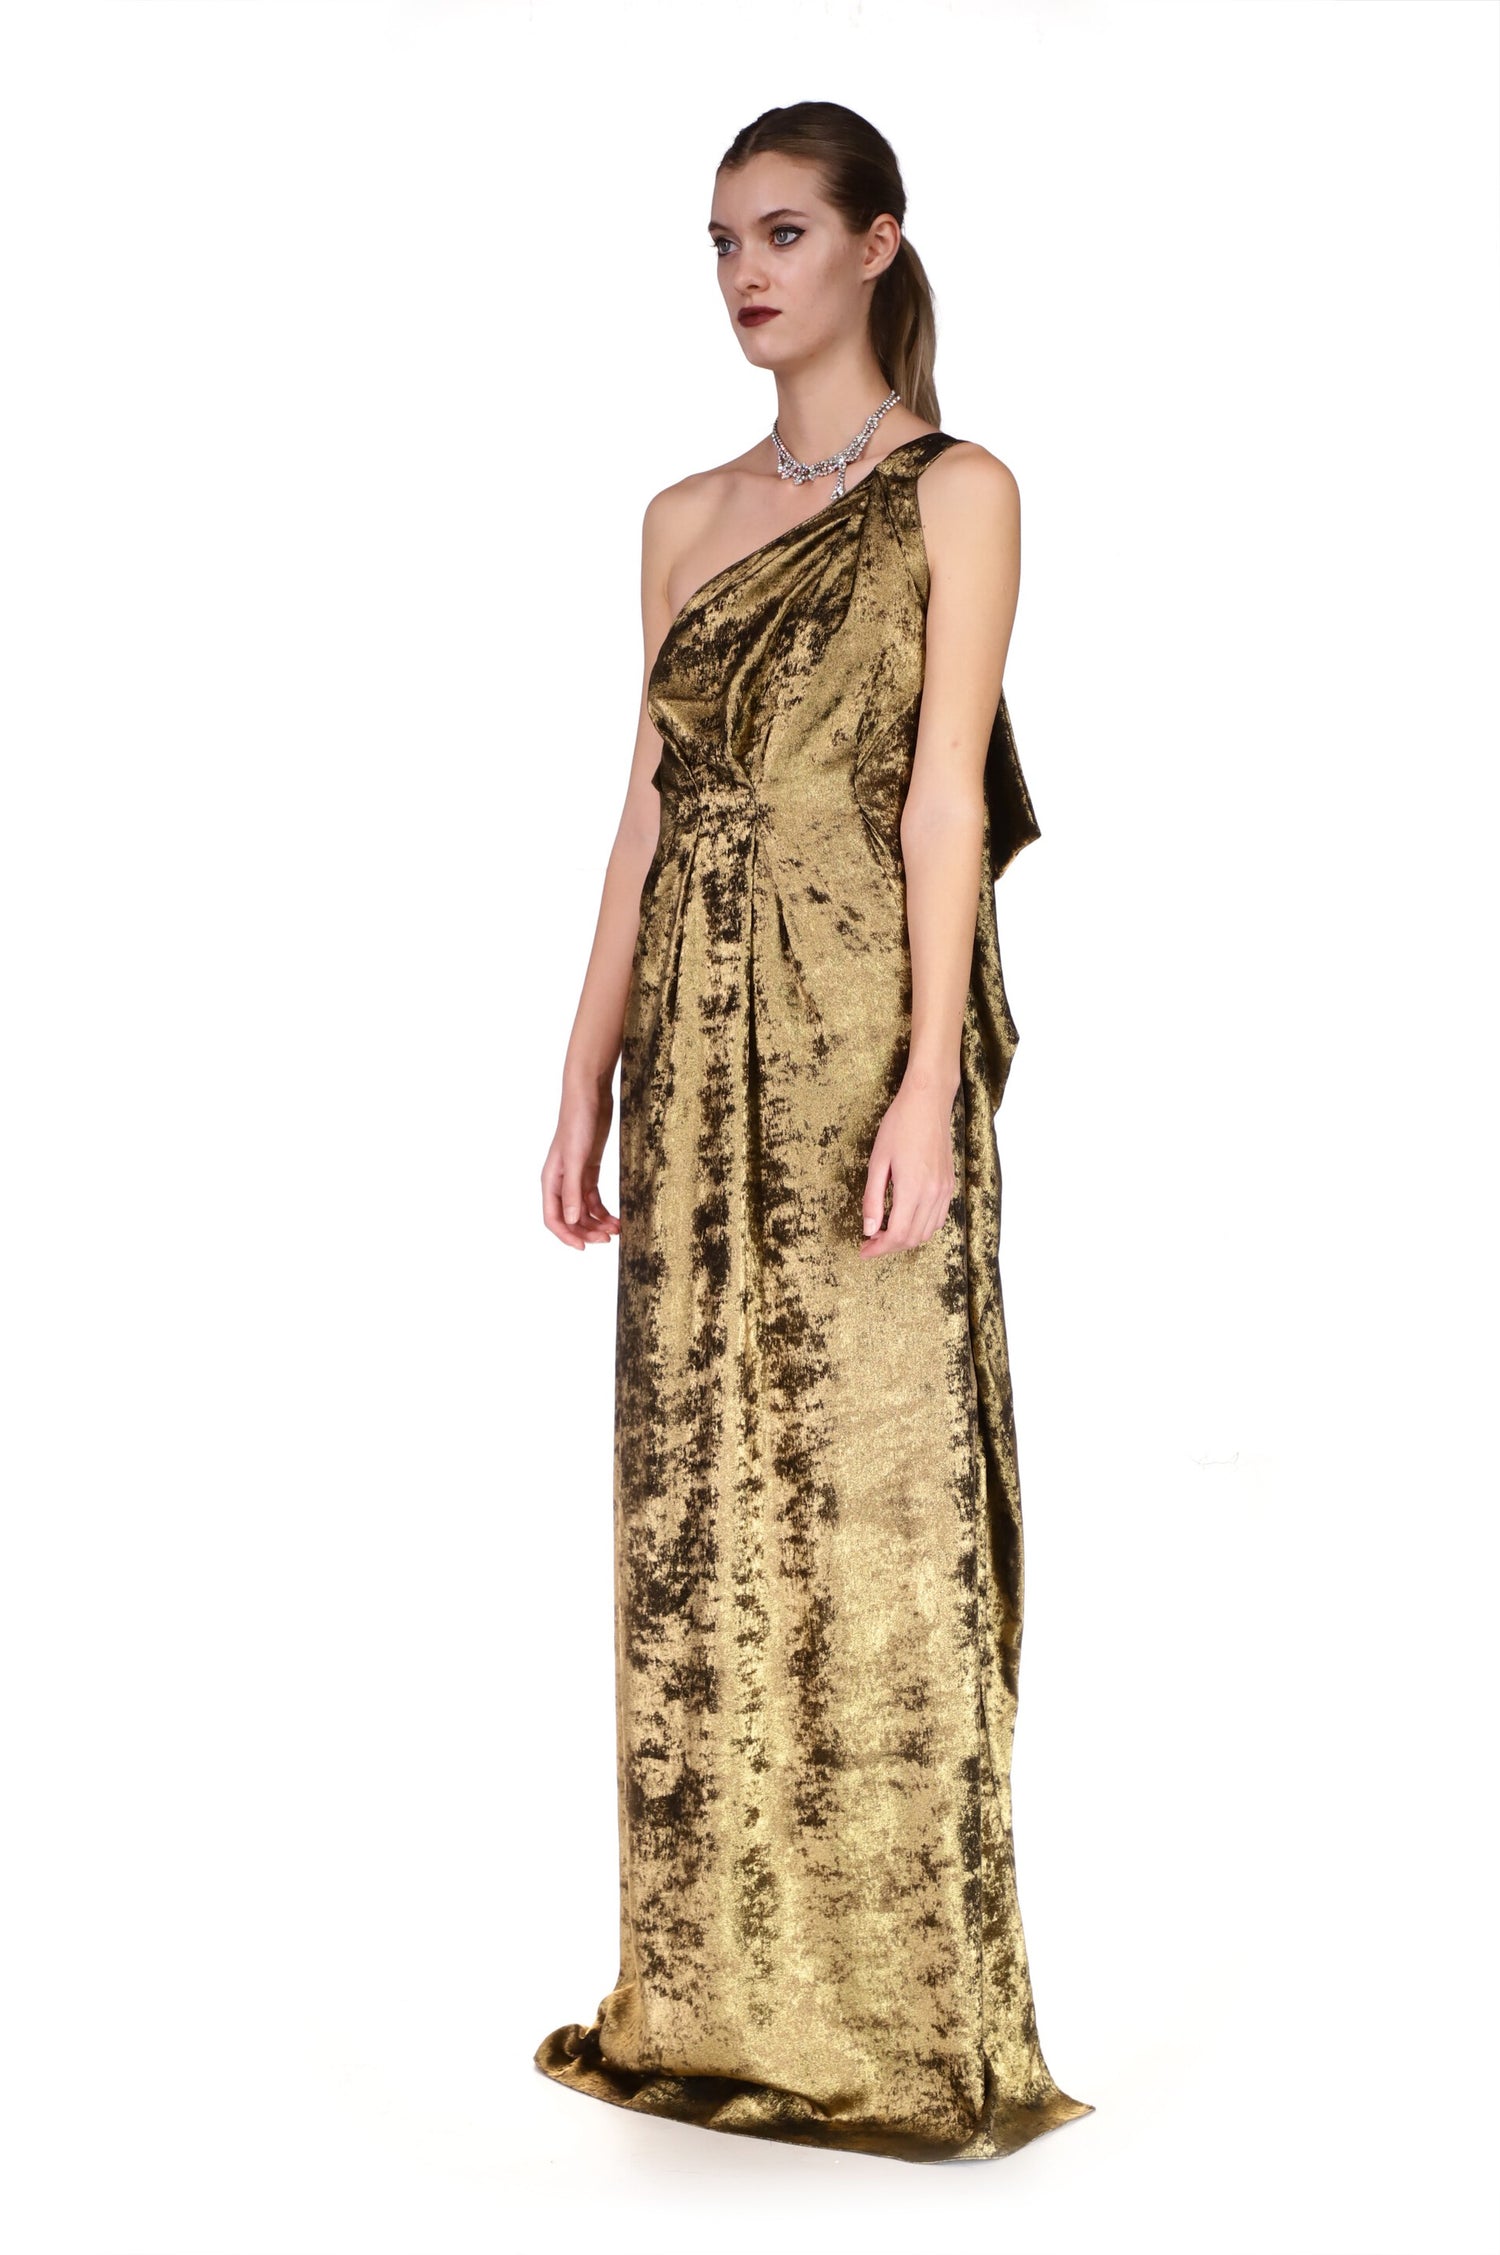 'PYRITE' ONE SHOULDER GOWN - DRESSES - Libertine